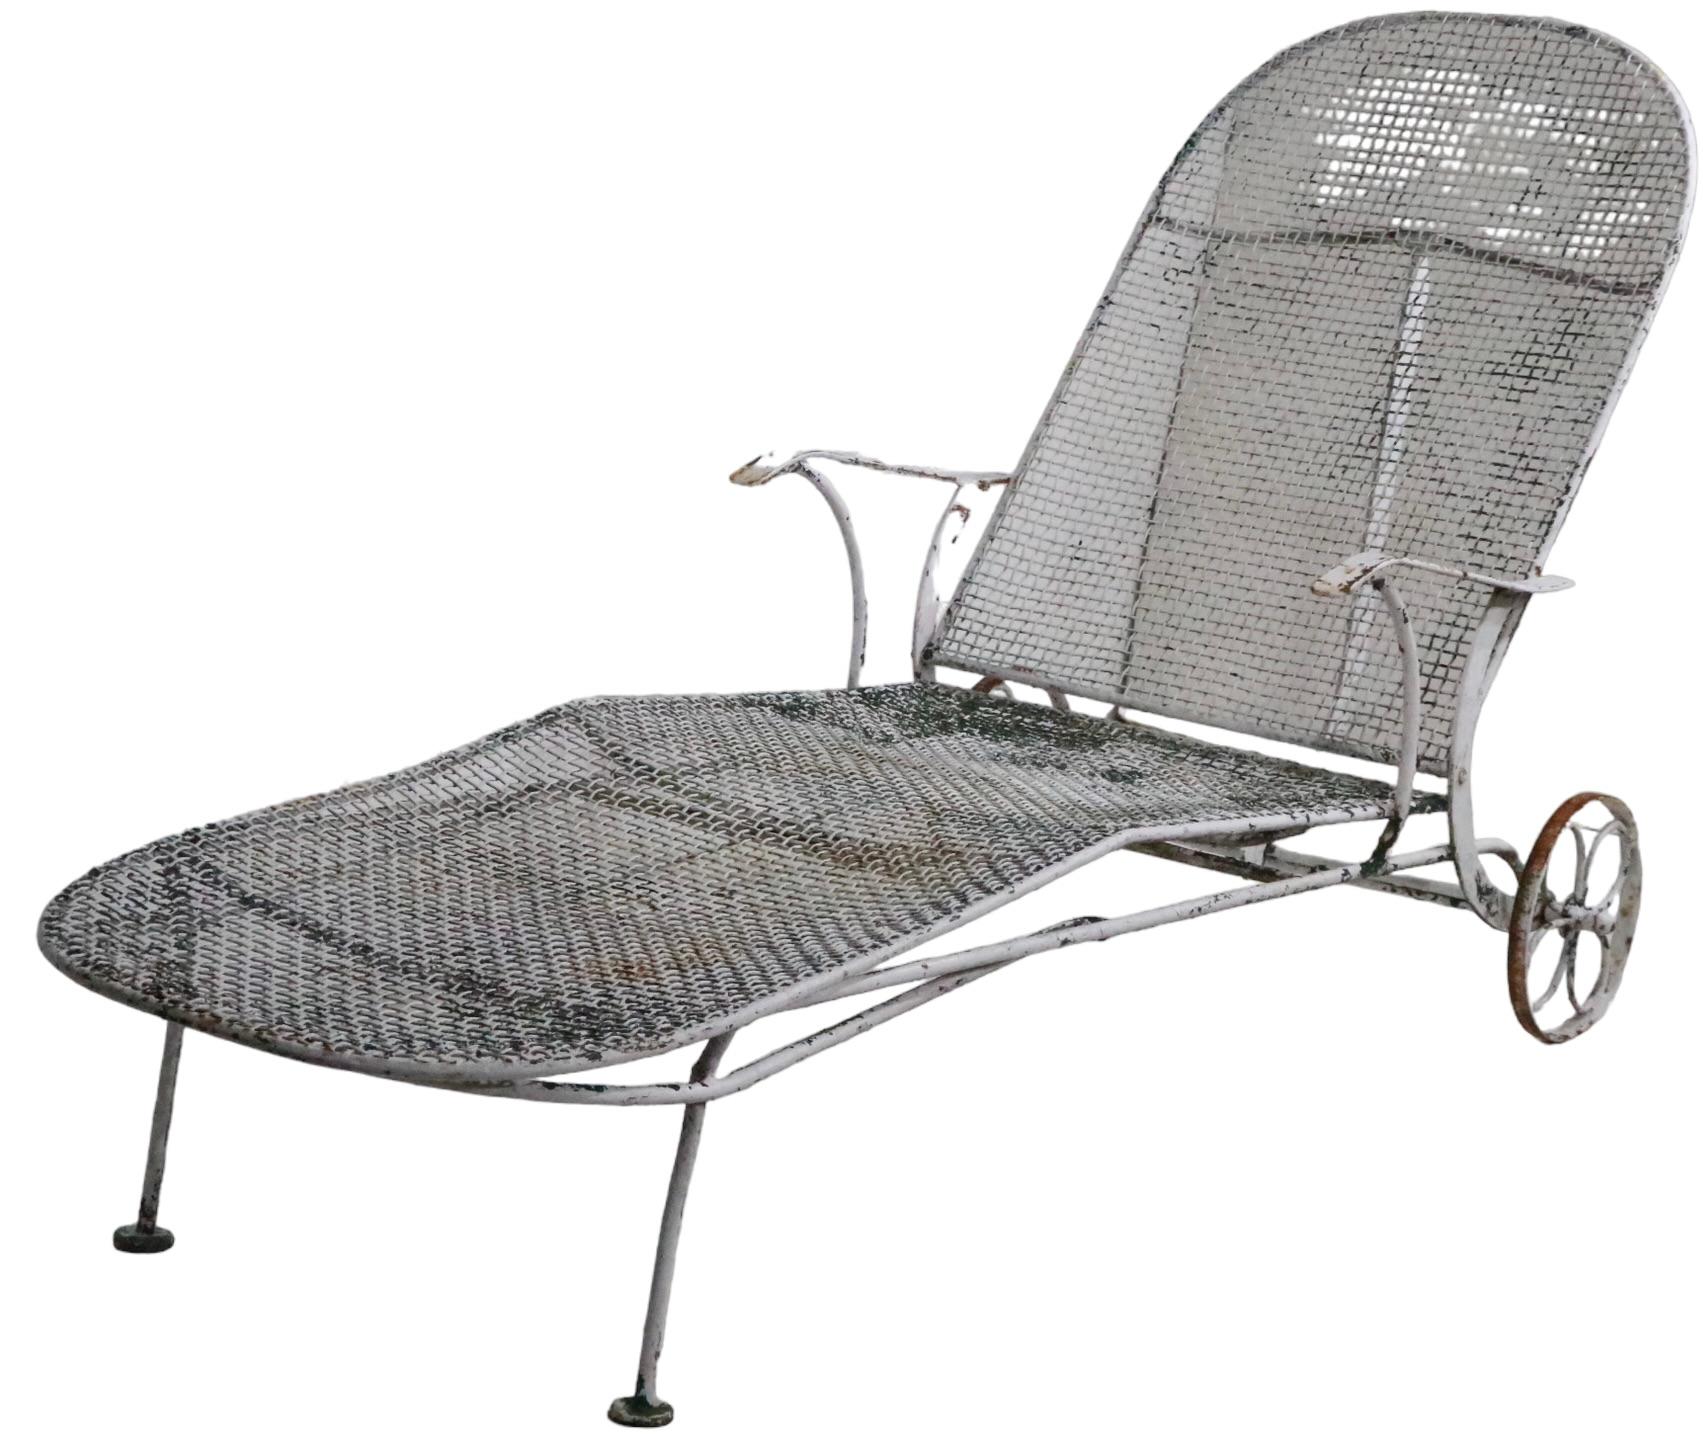  Wrought Iron Garden Poolside Patio Woodard Sculptura Chaise Lounge c. 1950's For Sale 3